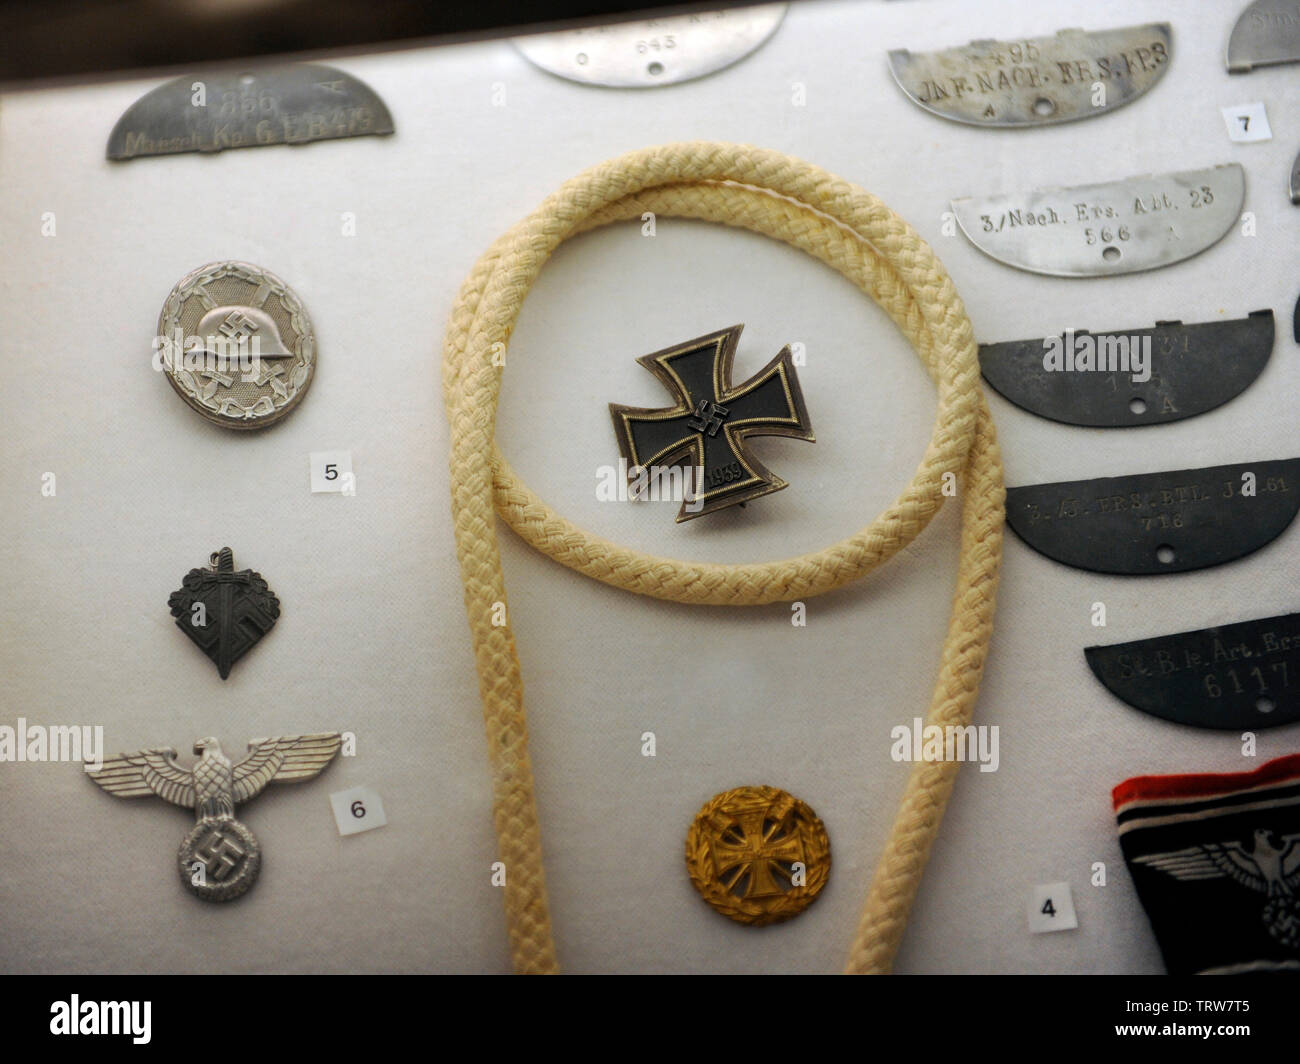 German Army. Insignias of armed forces (Wehrmacht), air forces (Luftwaffe) and national militia (Volkssturm). Museum of Oskar Schindler's Factory. Krakow. Poland. Stock Photo